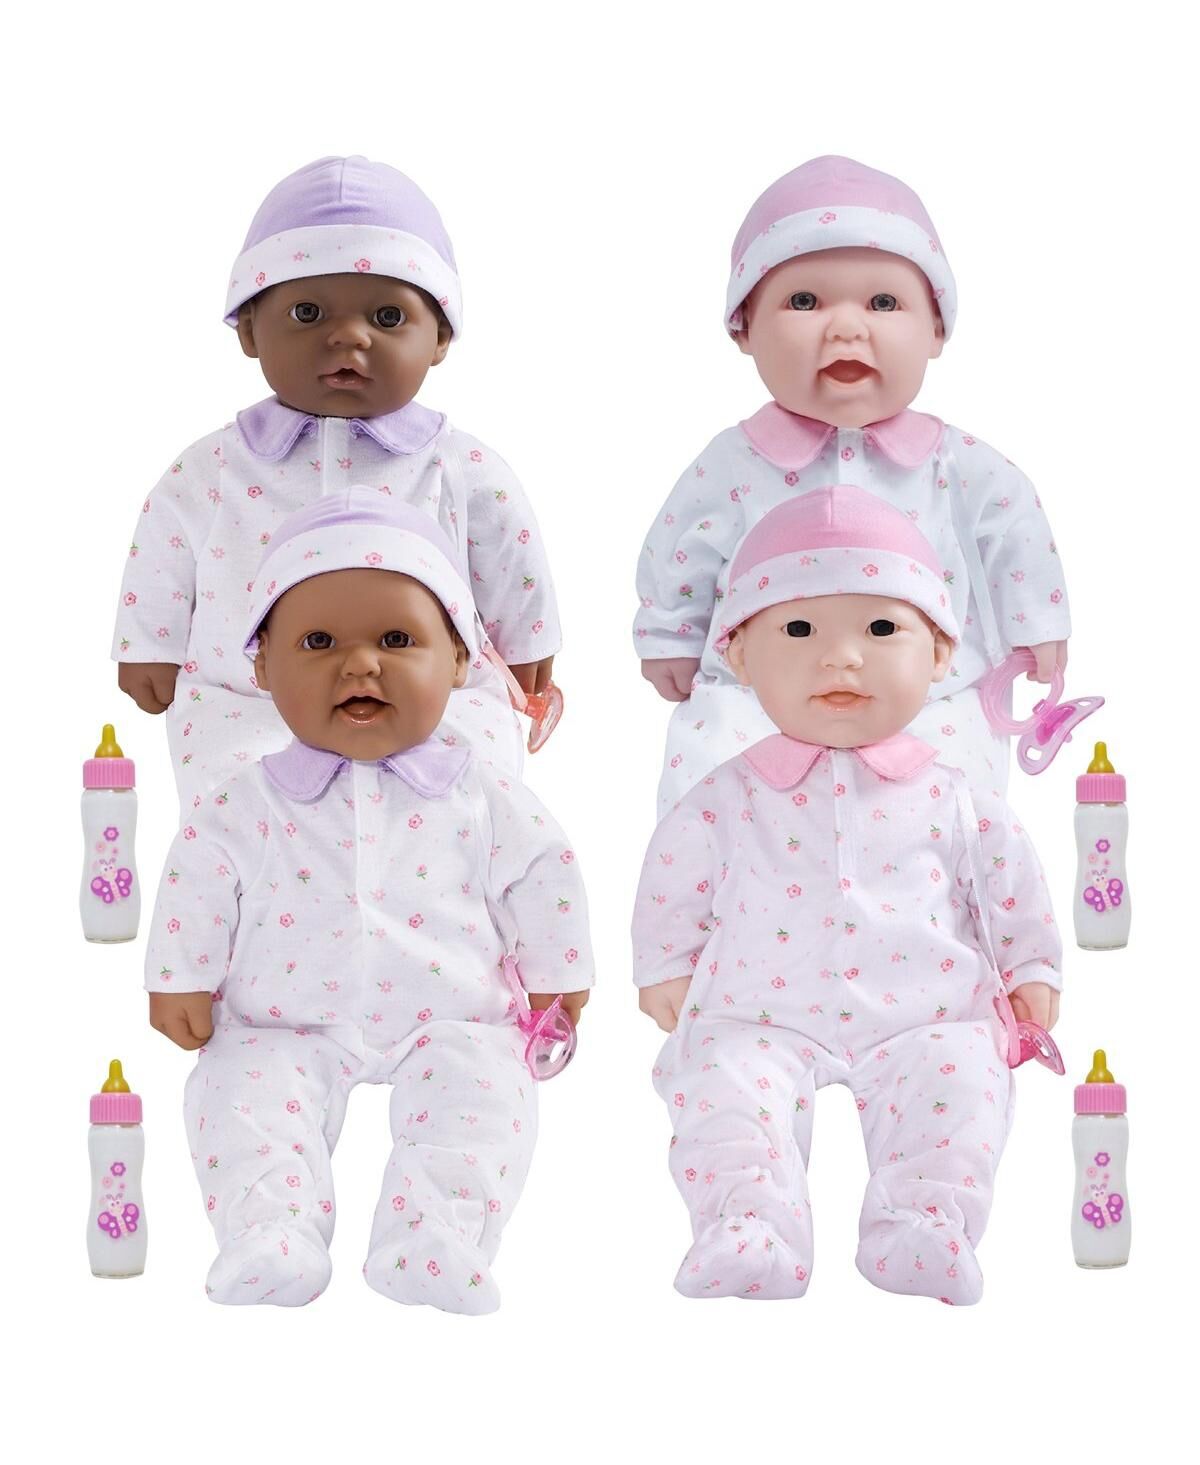 Jc Toys Loveable 16 Inch Dolls - Set of 4 - Assorted pre-pack